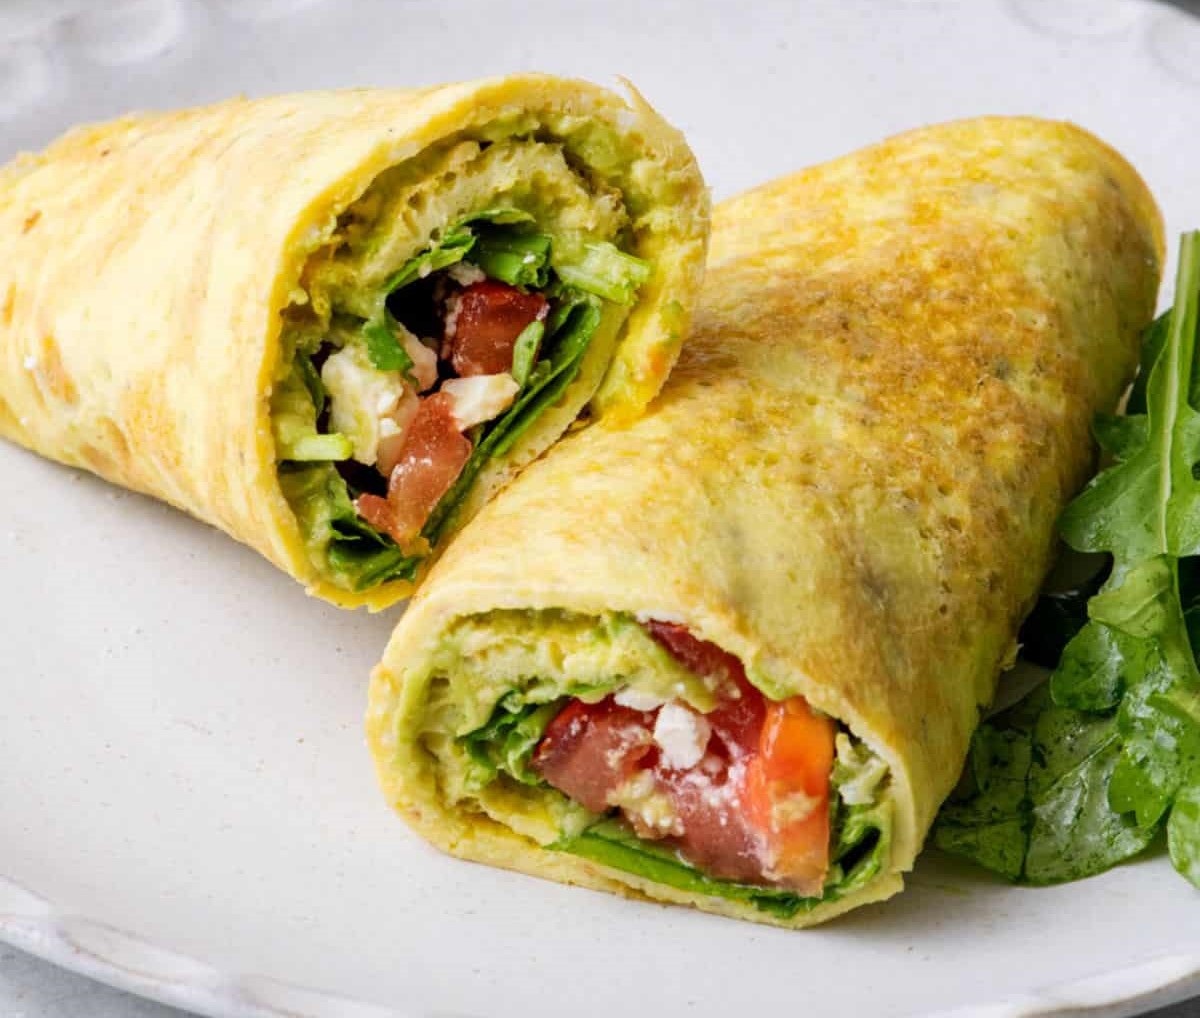 Low carb egg wrap - Image Courtesy of The Feel Good Foodie